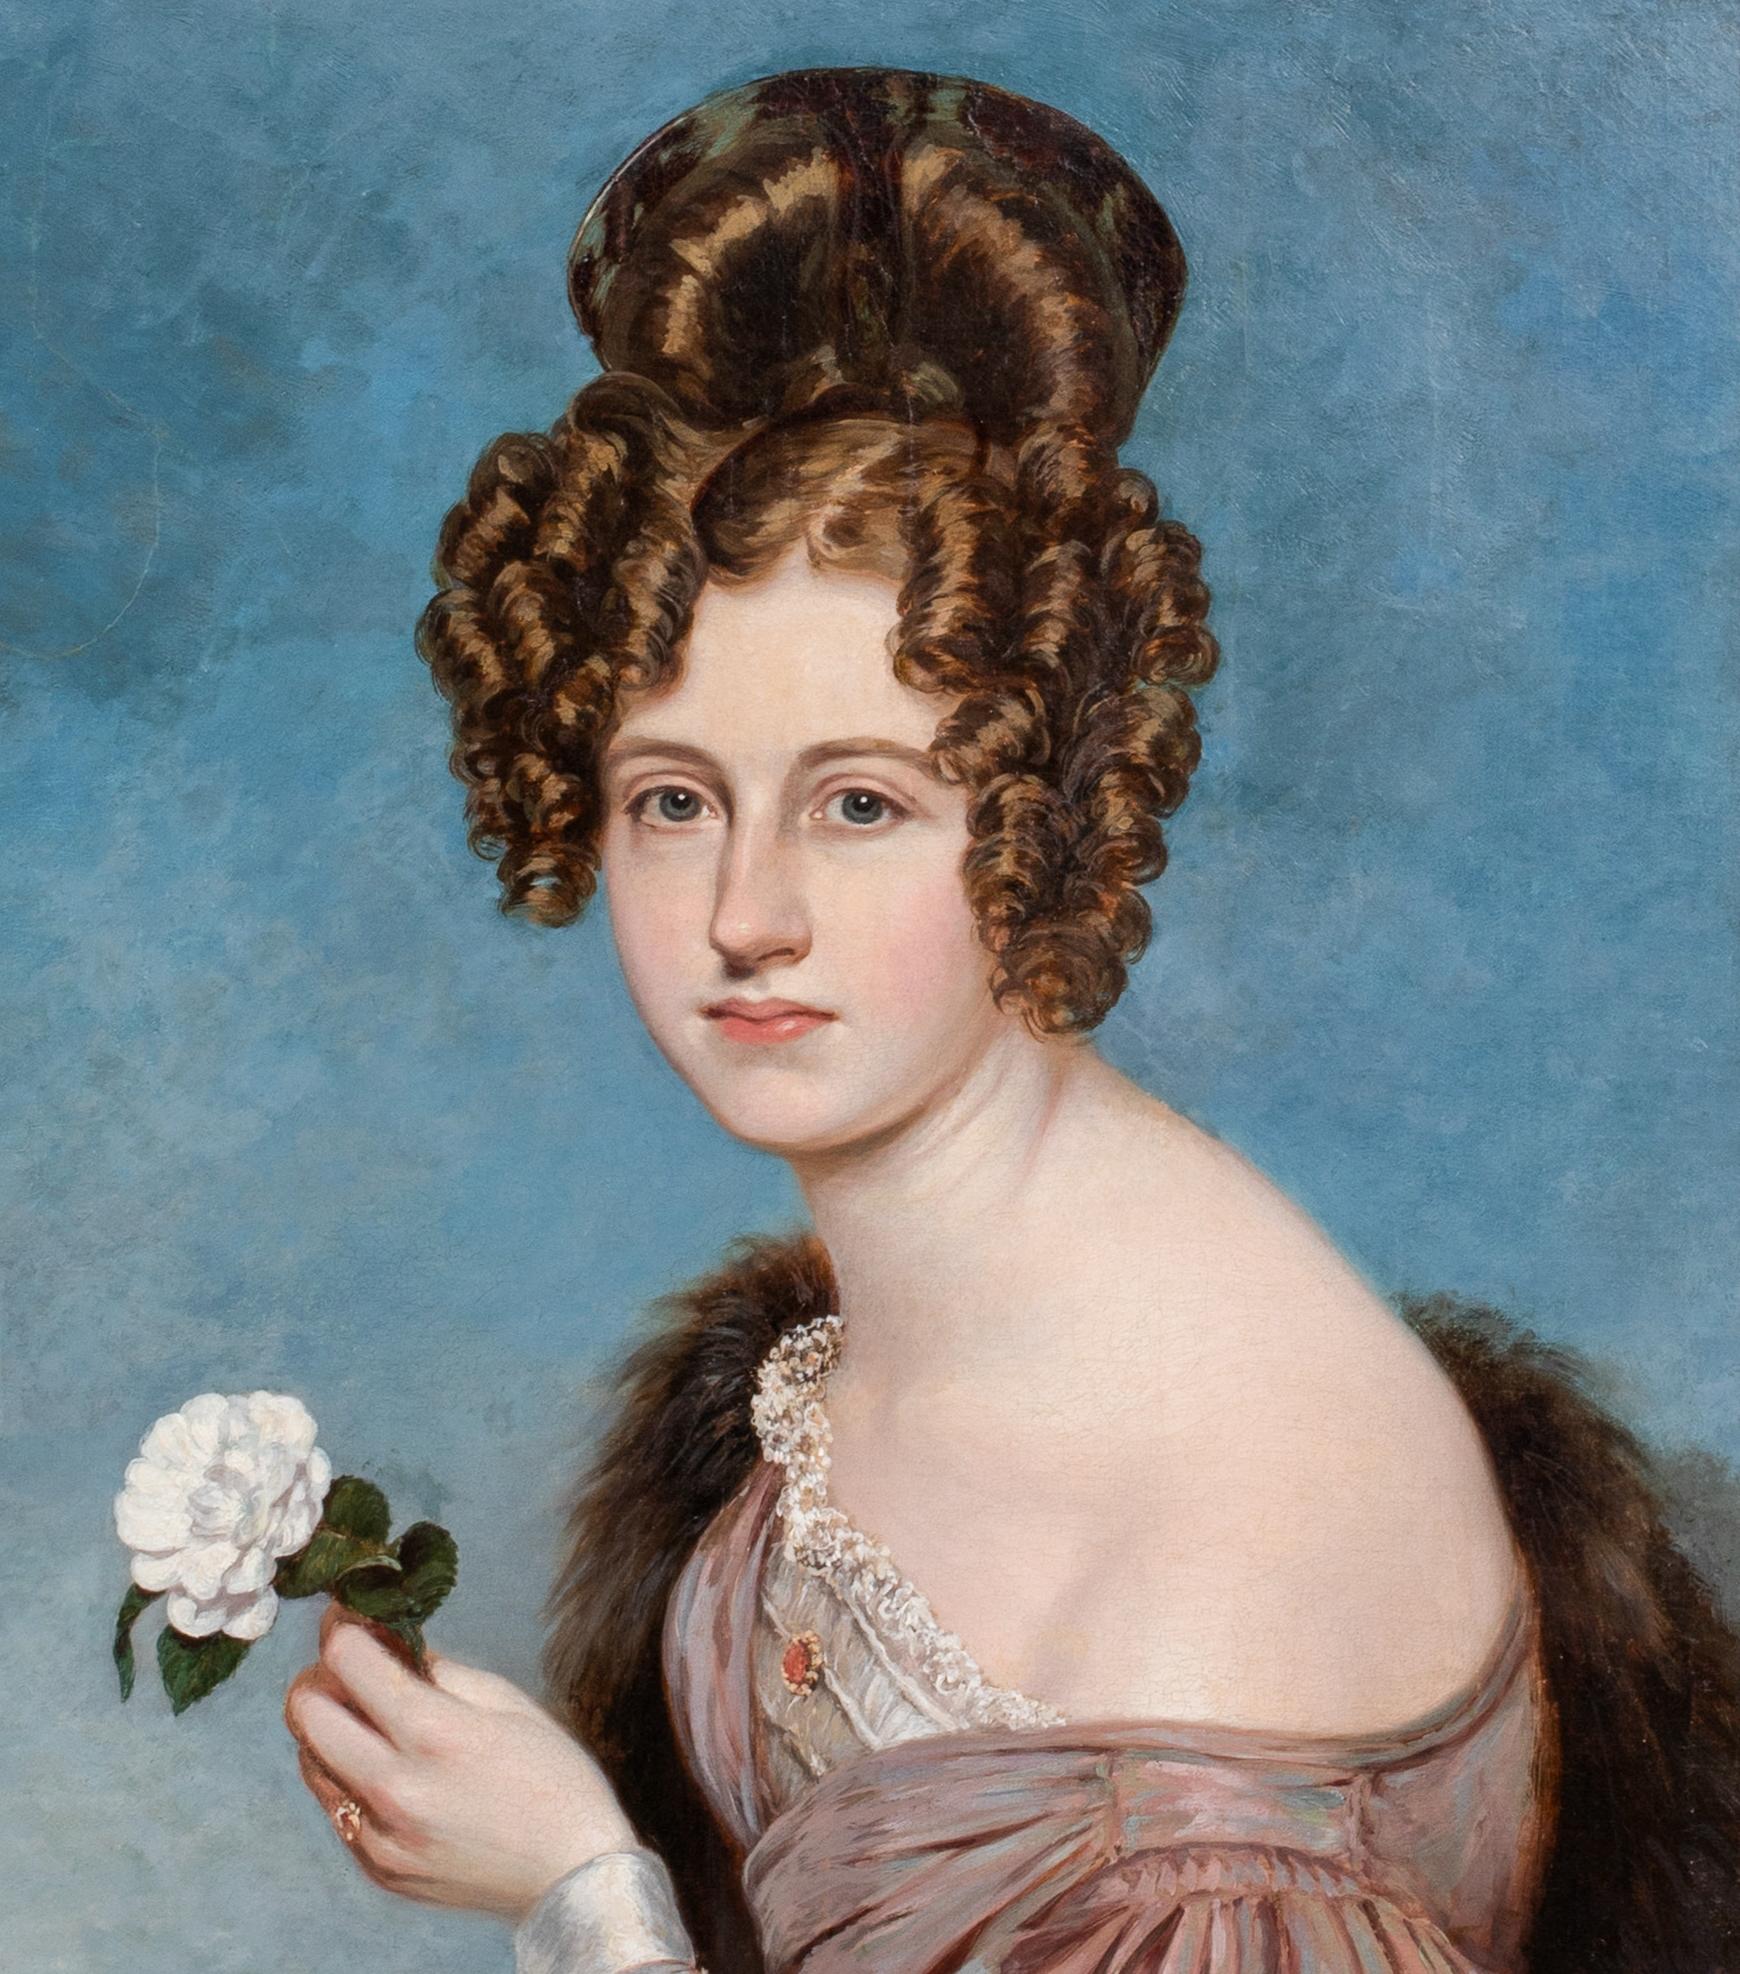  Portrait Of A Lady Holding A Camellia, early 19th Century    2